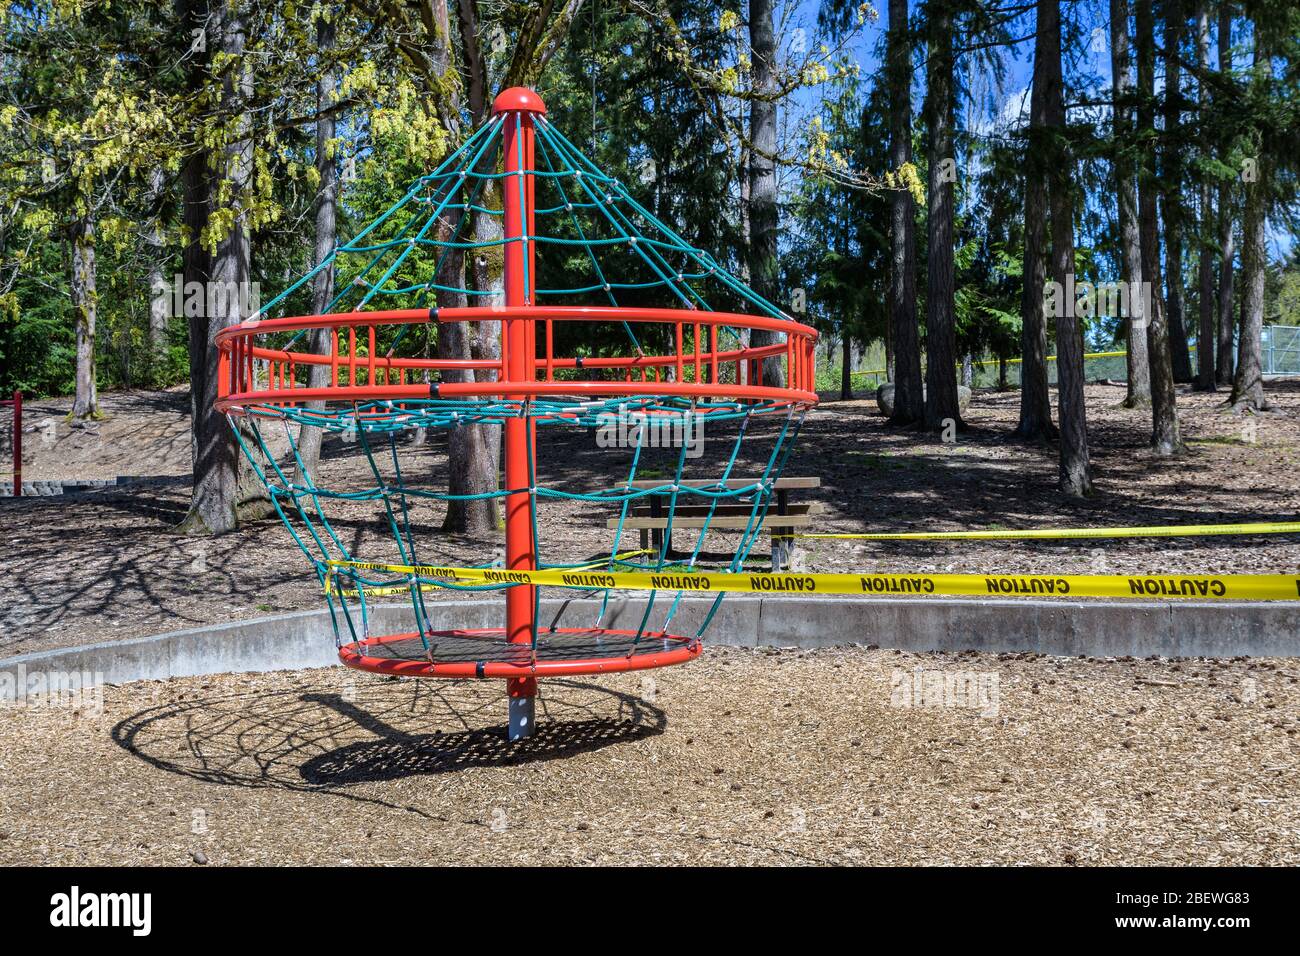 BELLEVUE, WA/USA – APRIL 15, 2020: Wilburton Hill Park, playground equipment closed with caution tape due to COVID 19 Stock Photo